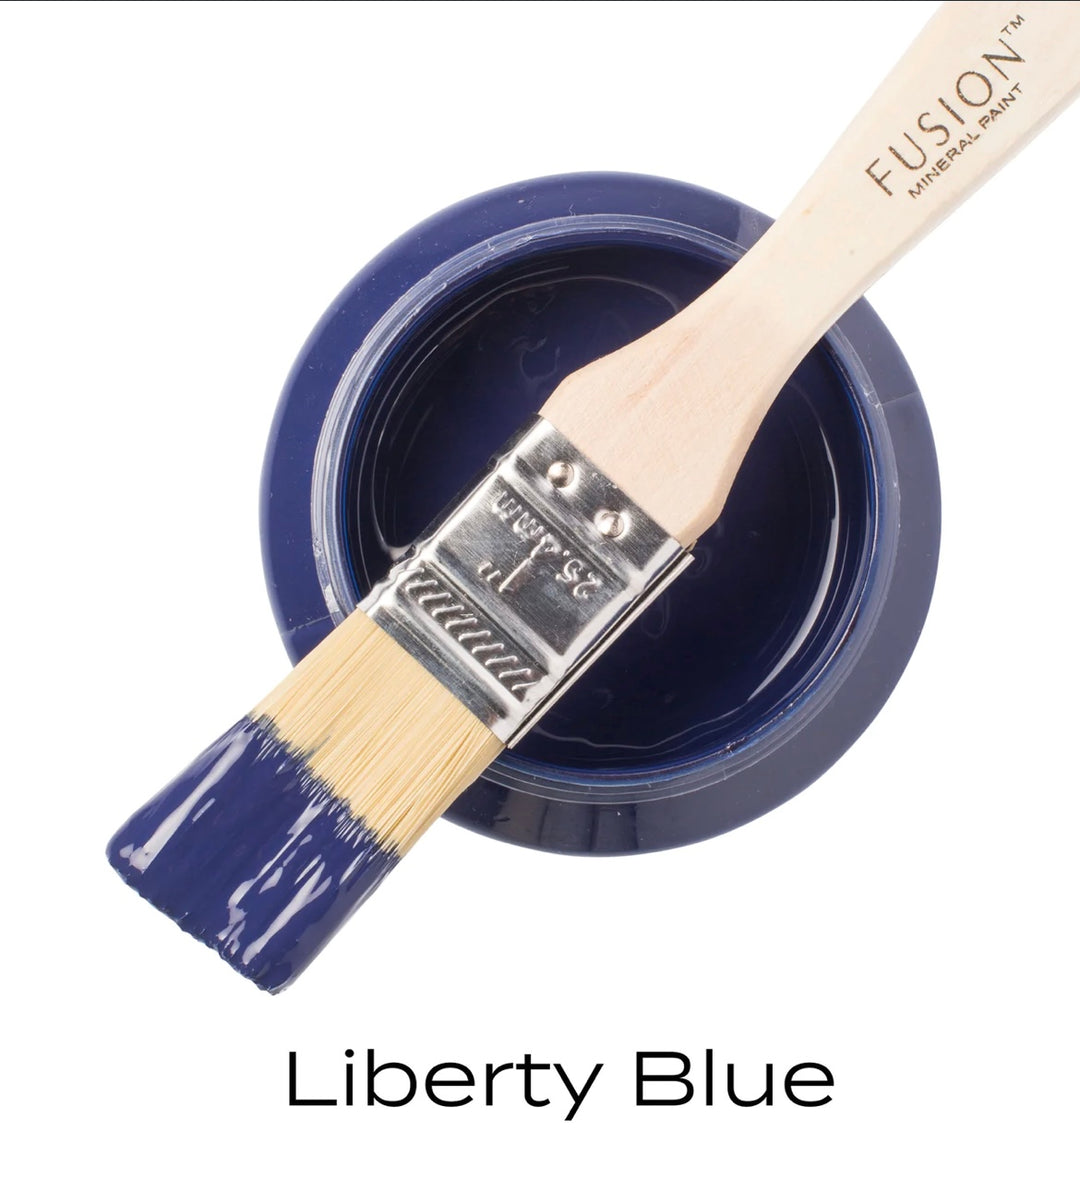 Fusion Mineral Paint - Liberty Blue